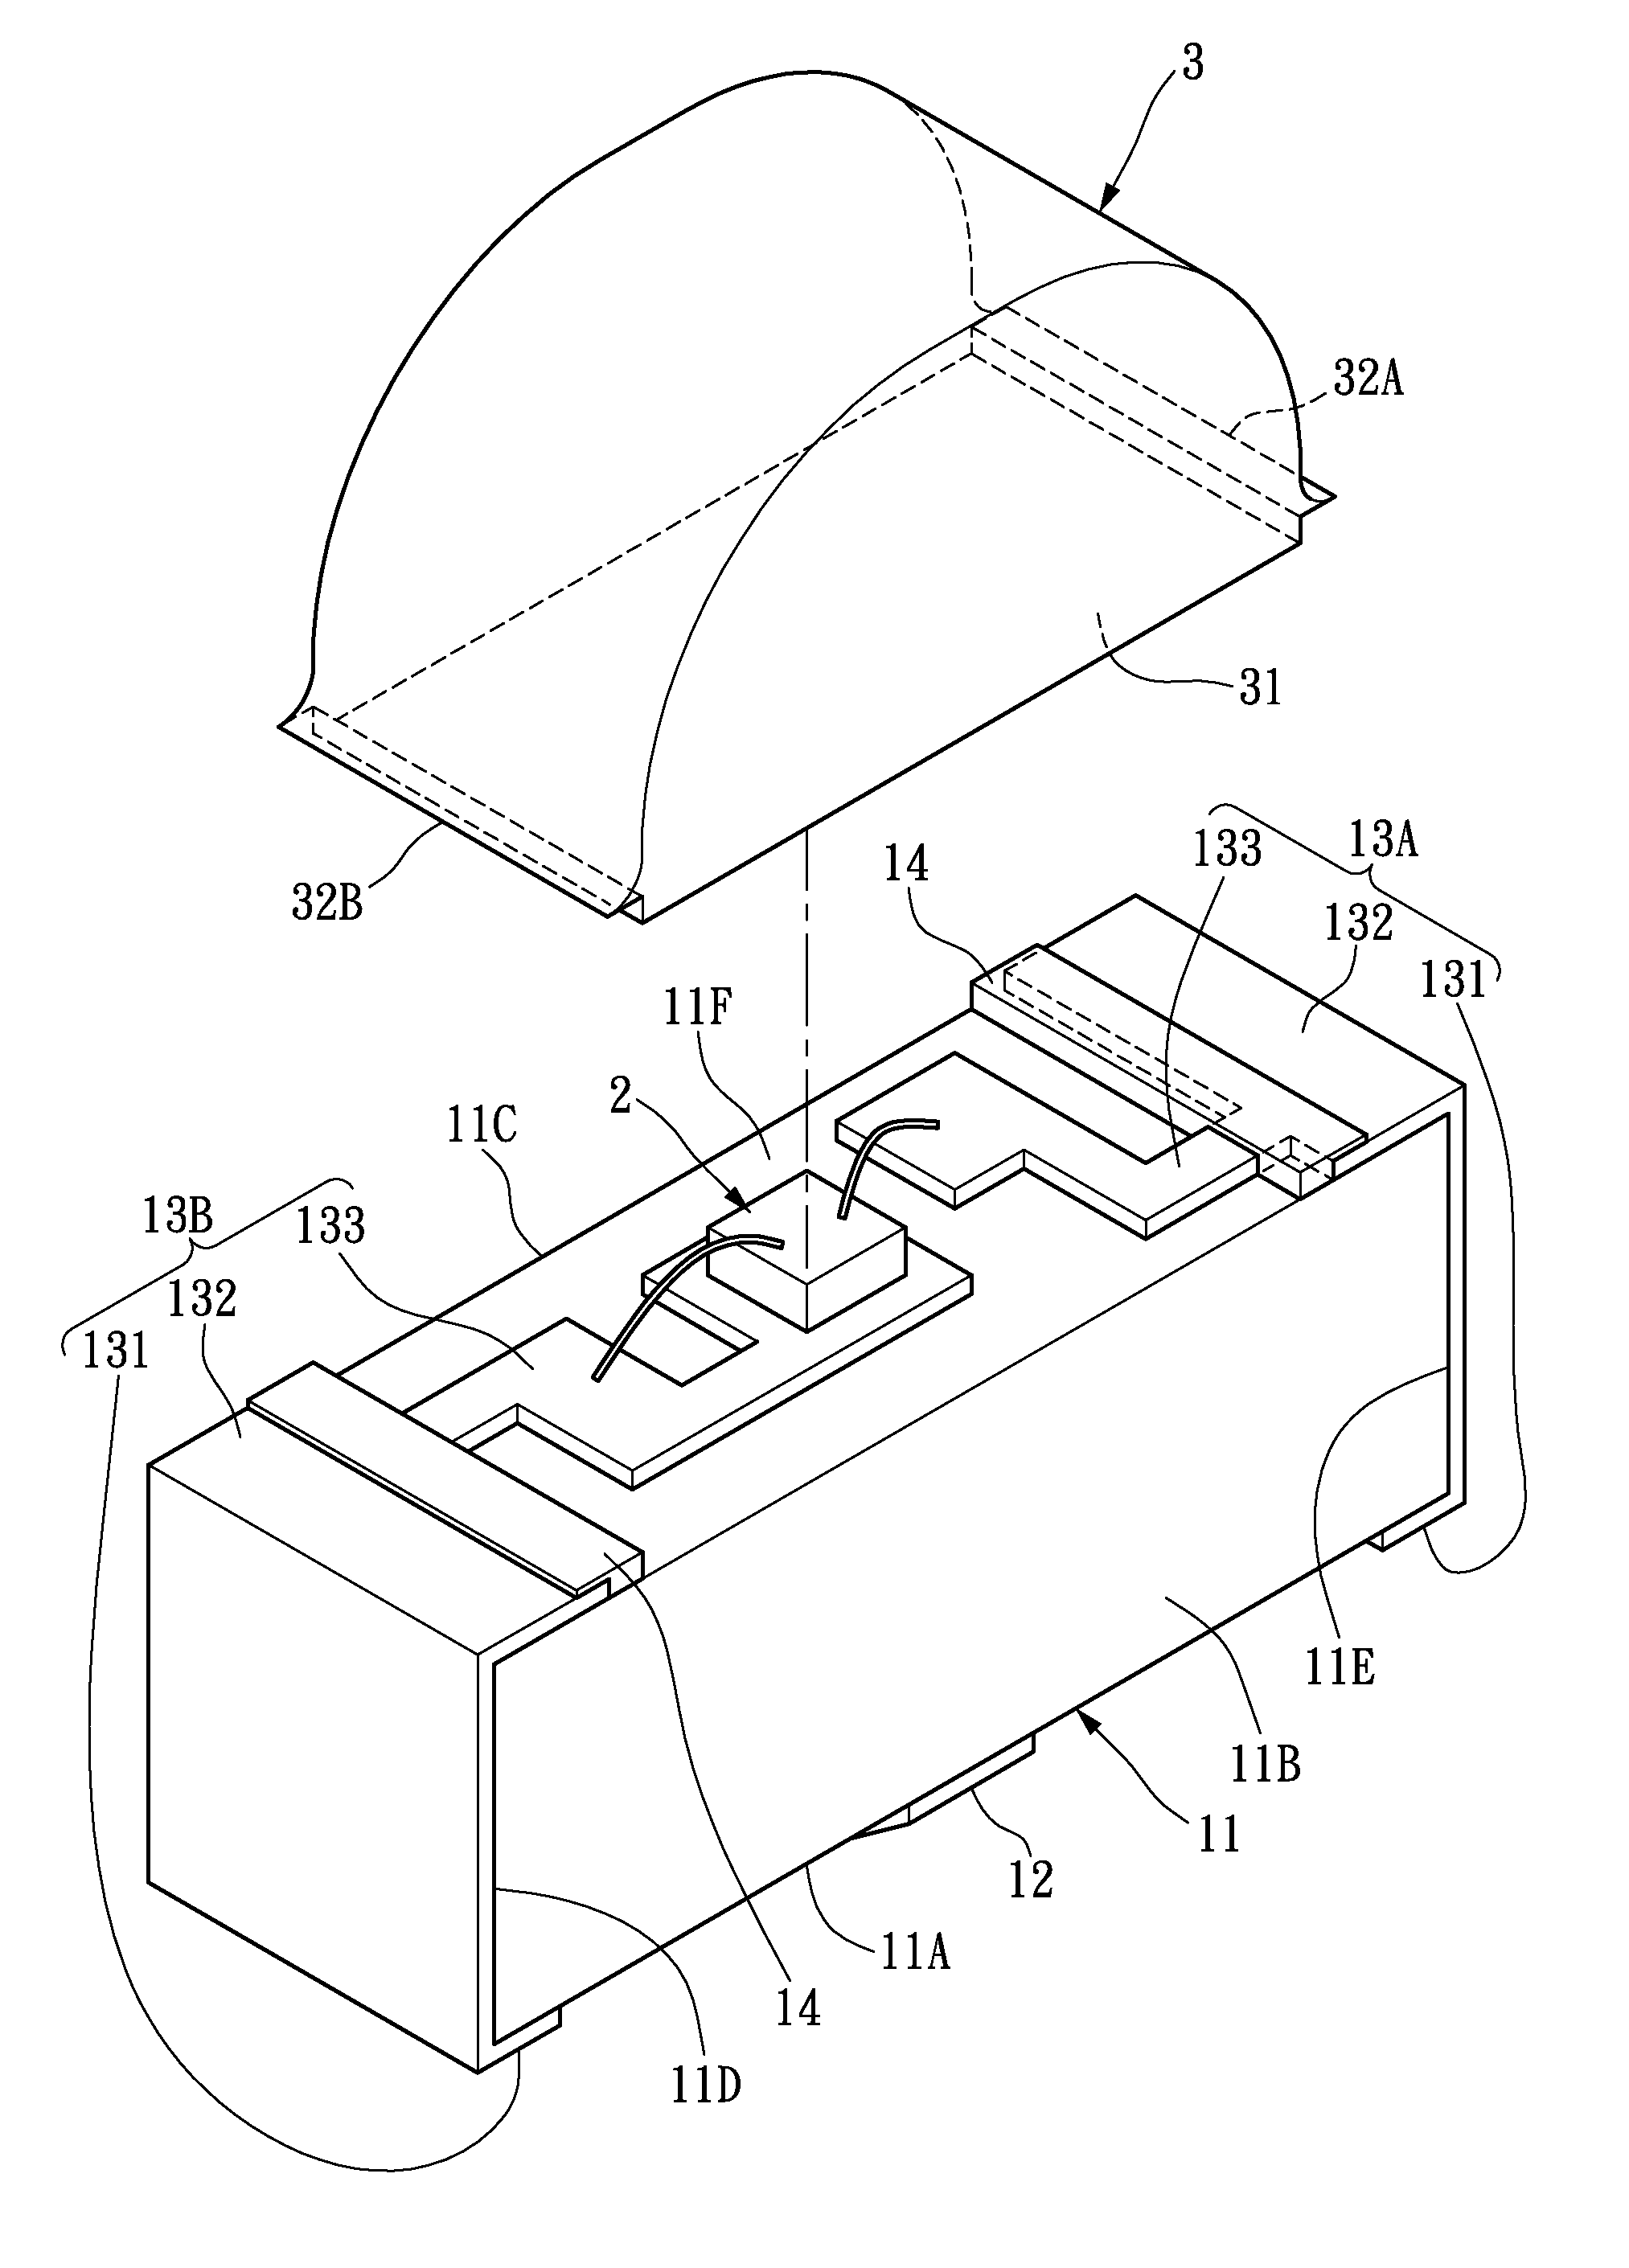 LED substrate structure, LED unit and lighting module having the same